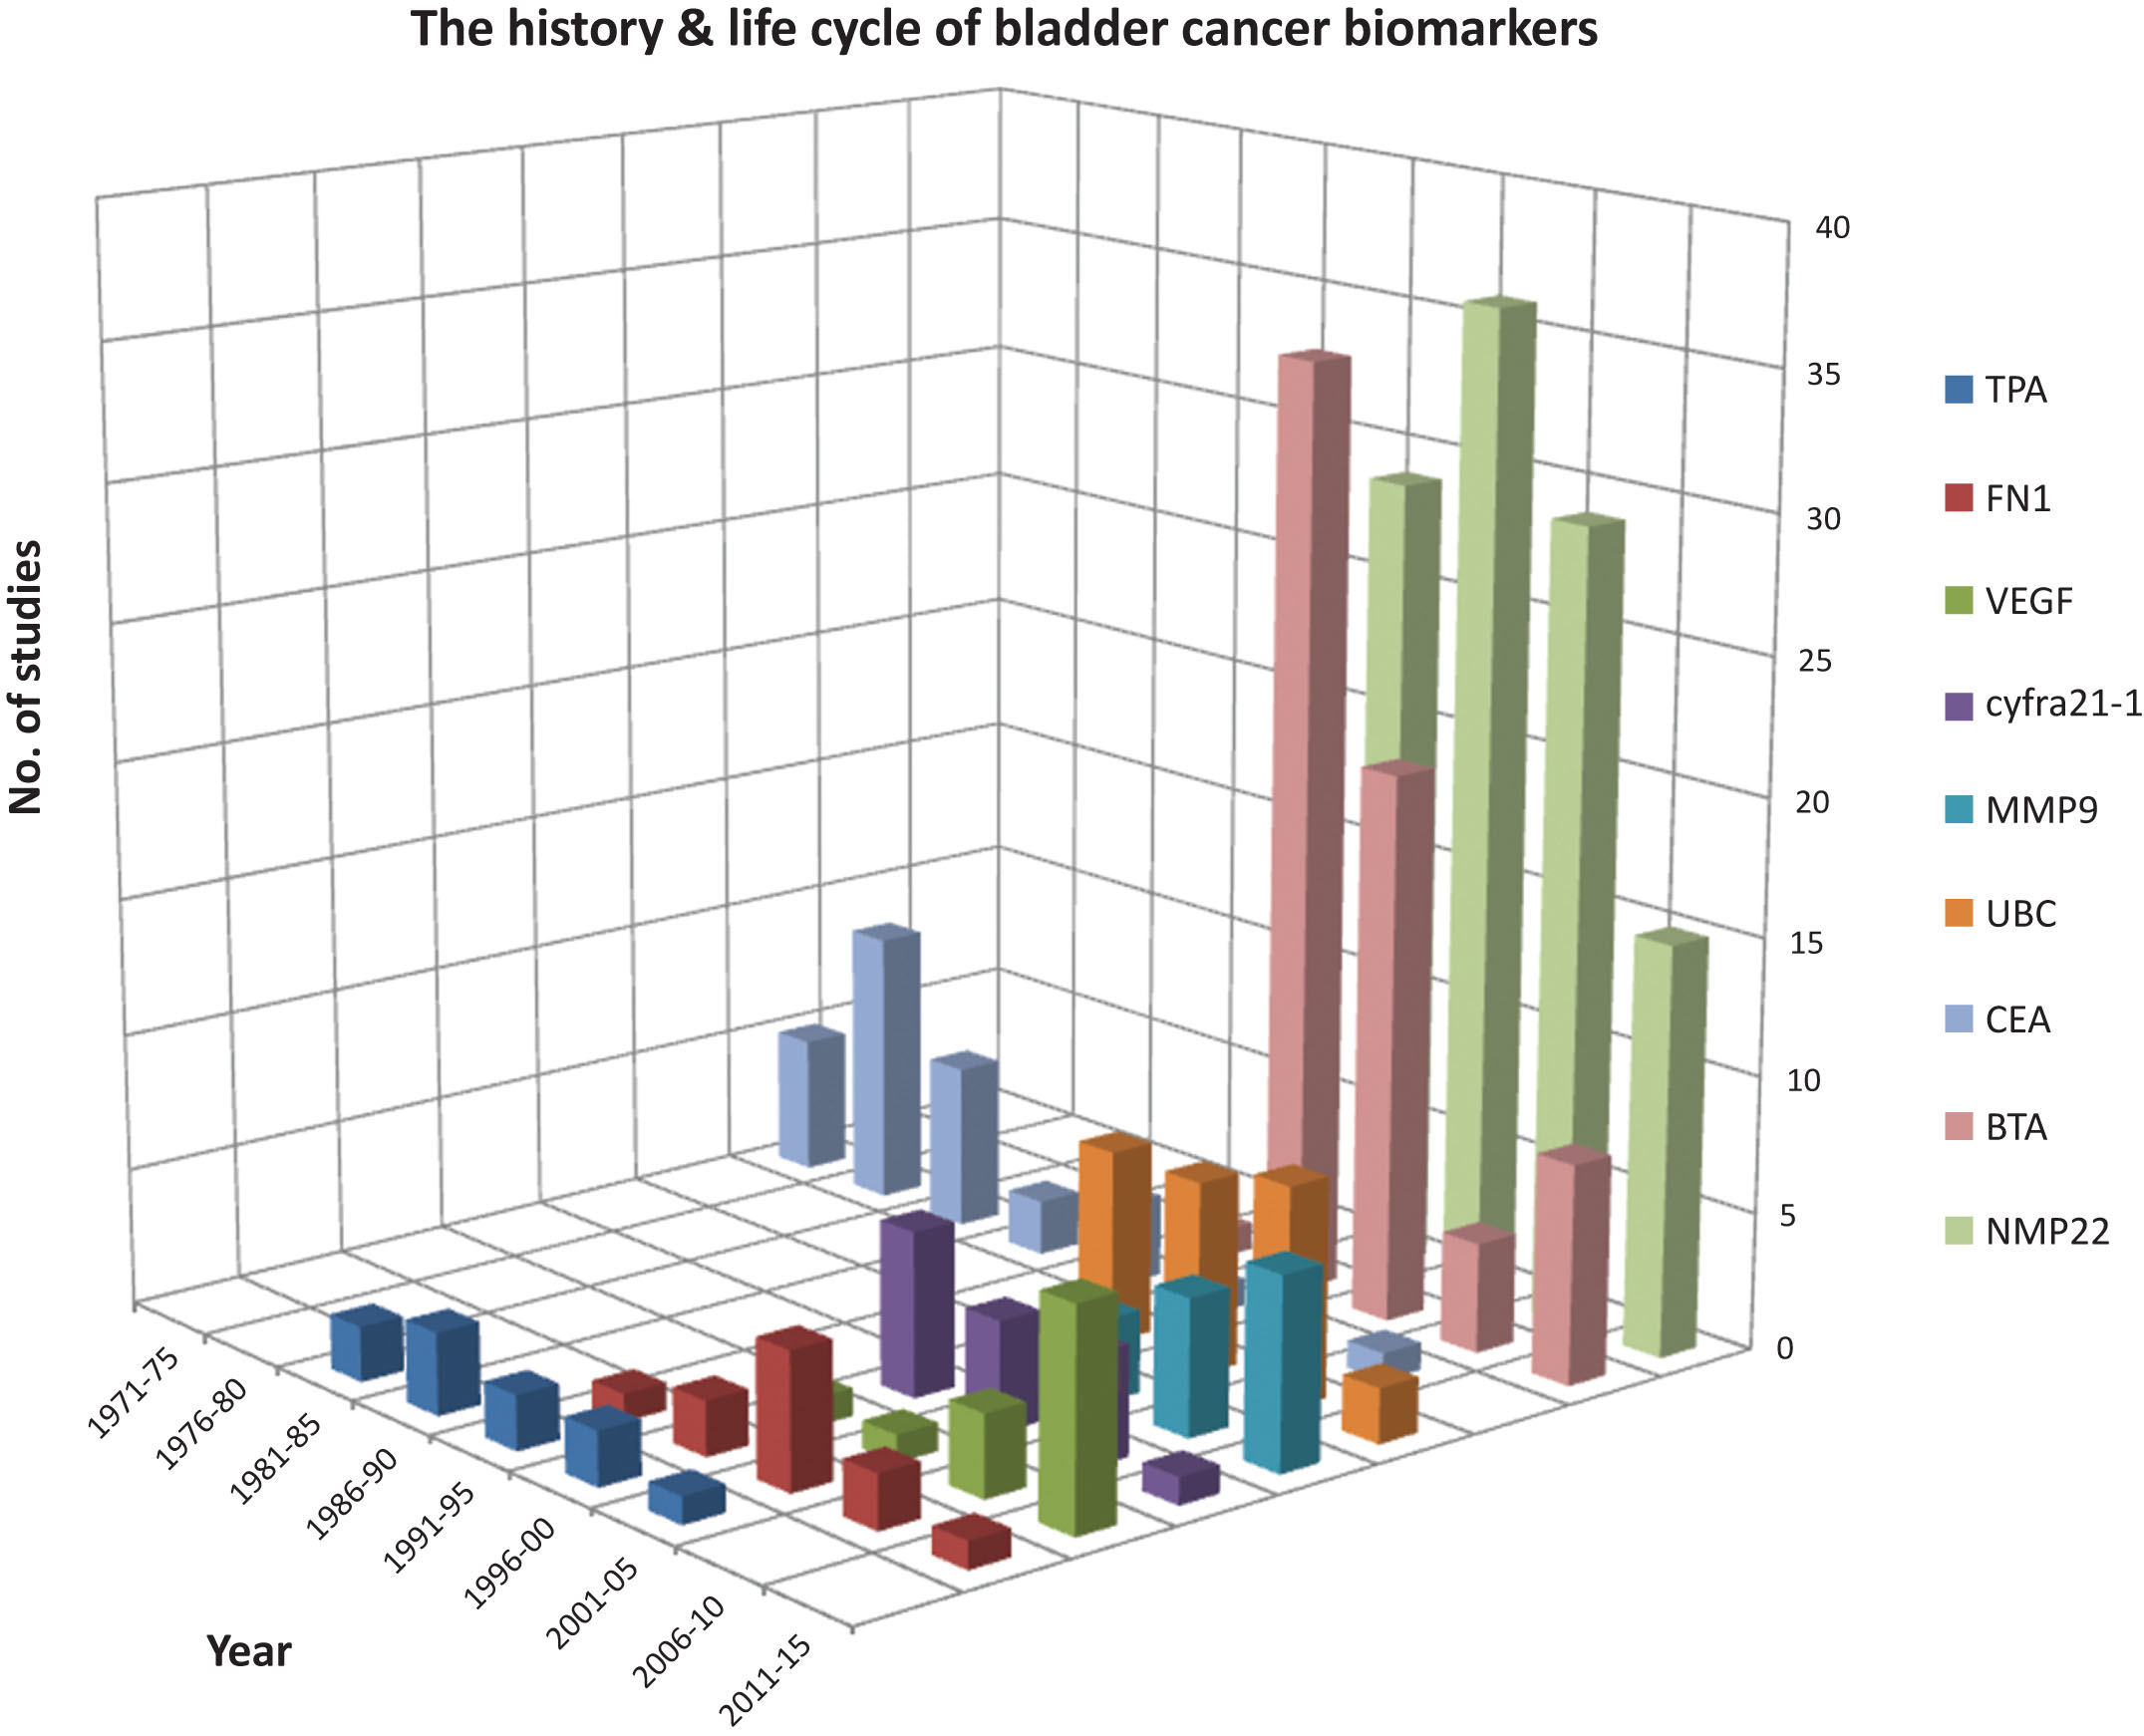 The history and lifecycle of bladder cancer biomarkers. The number of publications for each biomarker with >10 publications in total is shown for each half-decade from 1971. CEA peaks in the 1970s and TPA in the 1980s. BTA and cyfra 21-1 peak in 1996–2000 whilst fibronectin, NMP22 and UBC peak in 2001–2005. The rate of publication of all of these biomarkers are now declining whereas MMP9 and VEGF continue to rise.